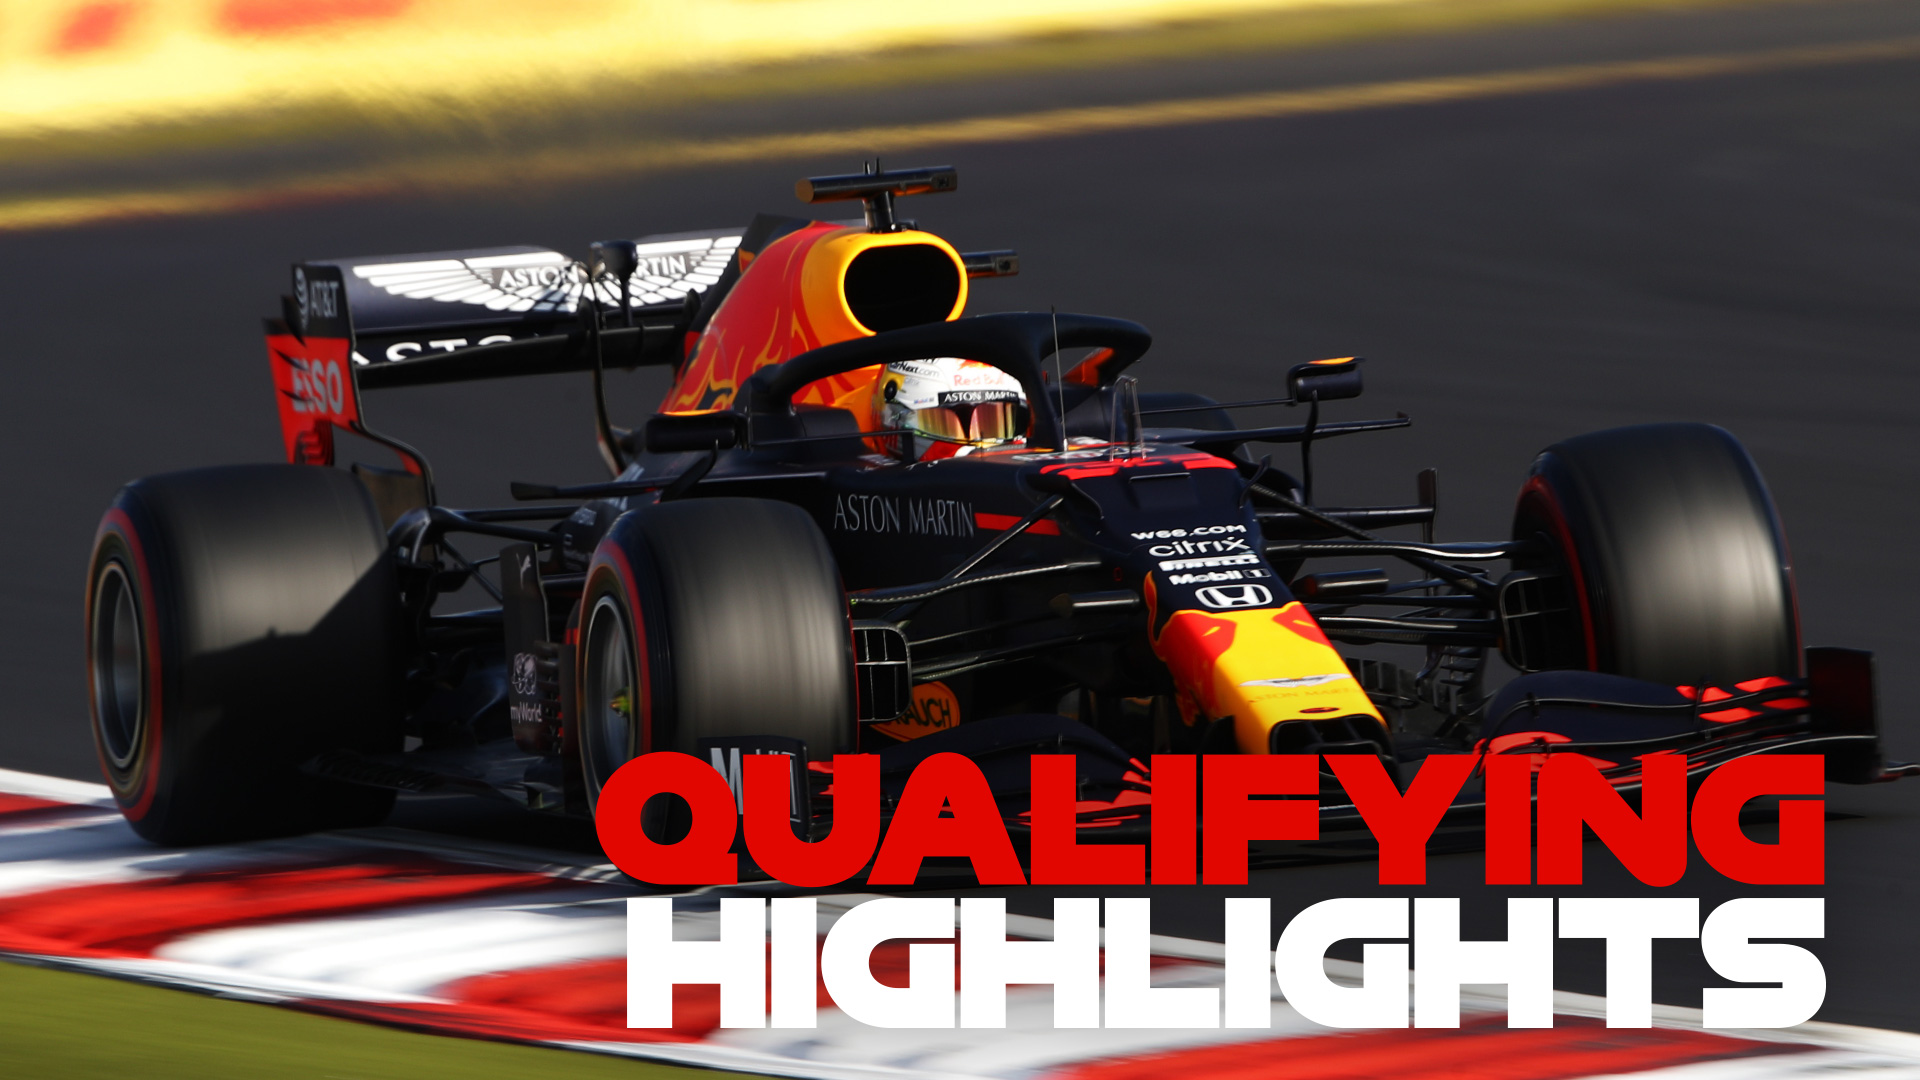 Eifel Grand qualifying highlights: Watch all the action from a thrilling fight for pole at the Nurburgring | Formula 1®